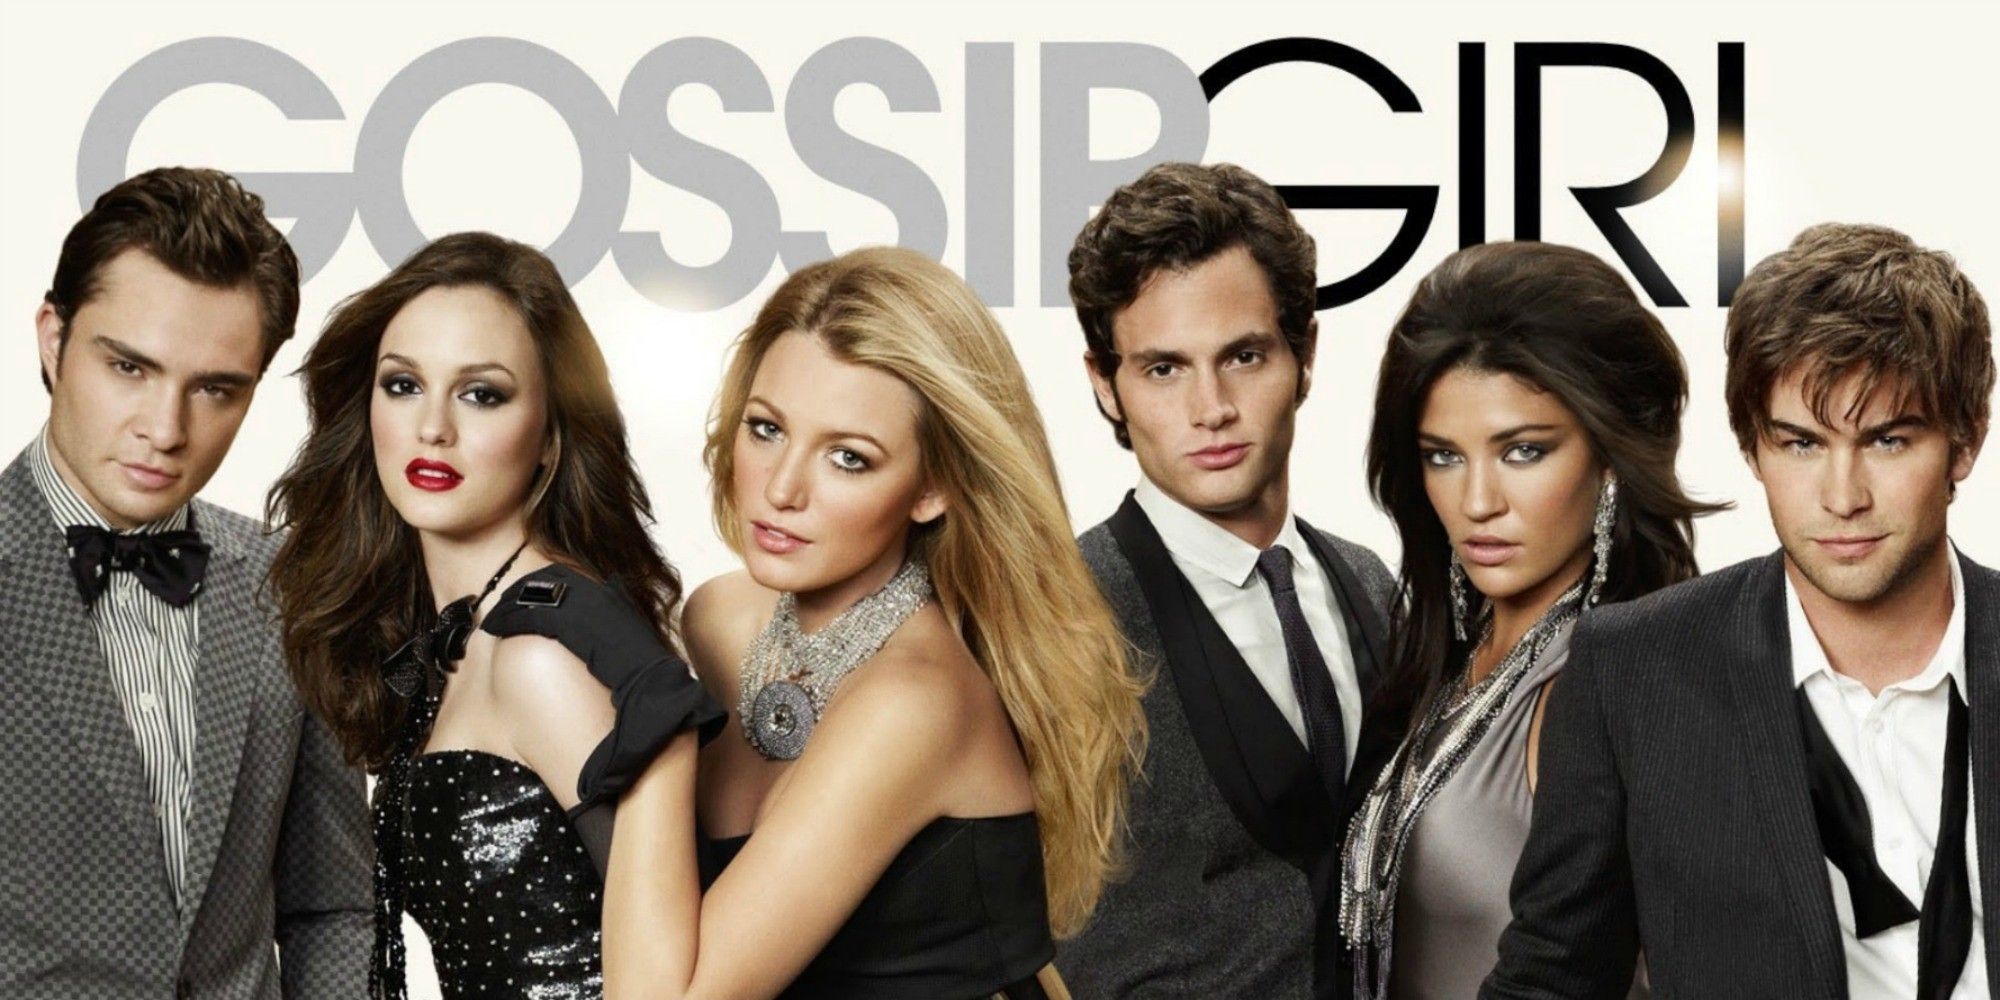 which season is gossip girl book 1 based on